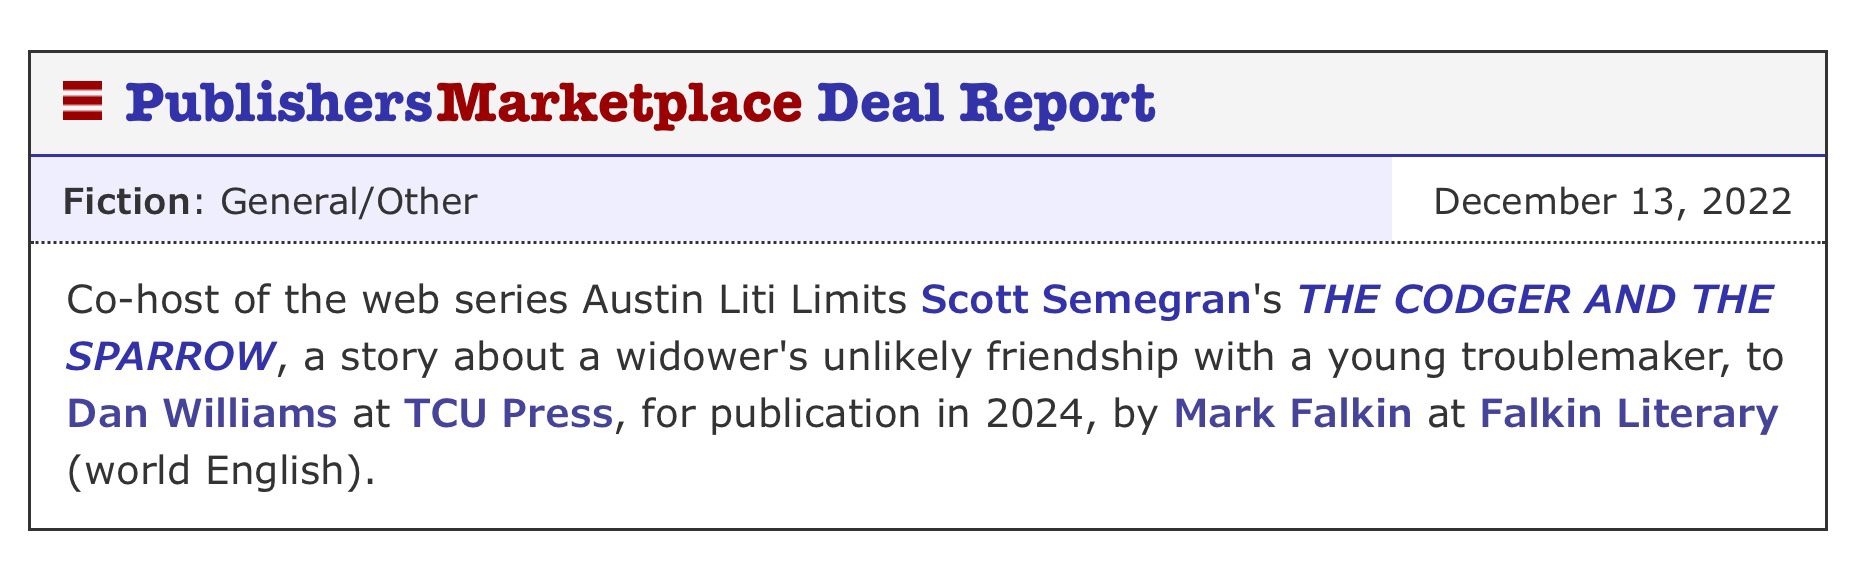 THE CODGER AND THE SPARROW will be published by TCU Press in 2024